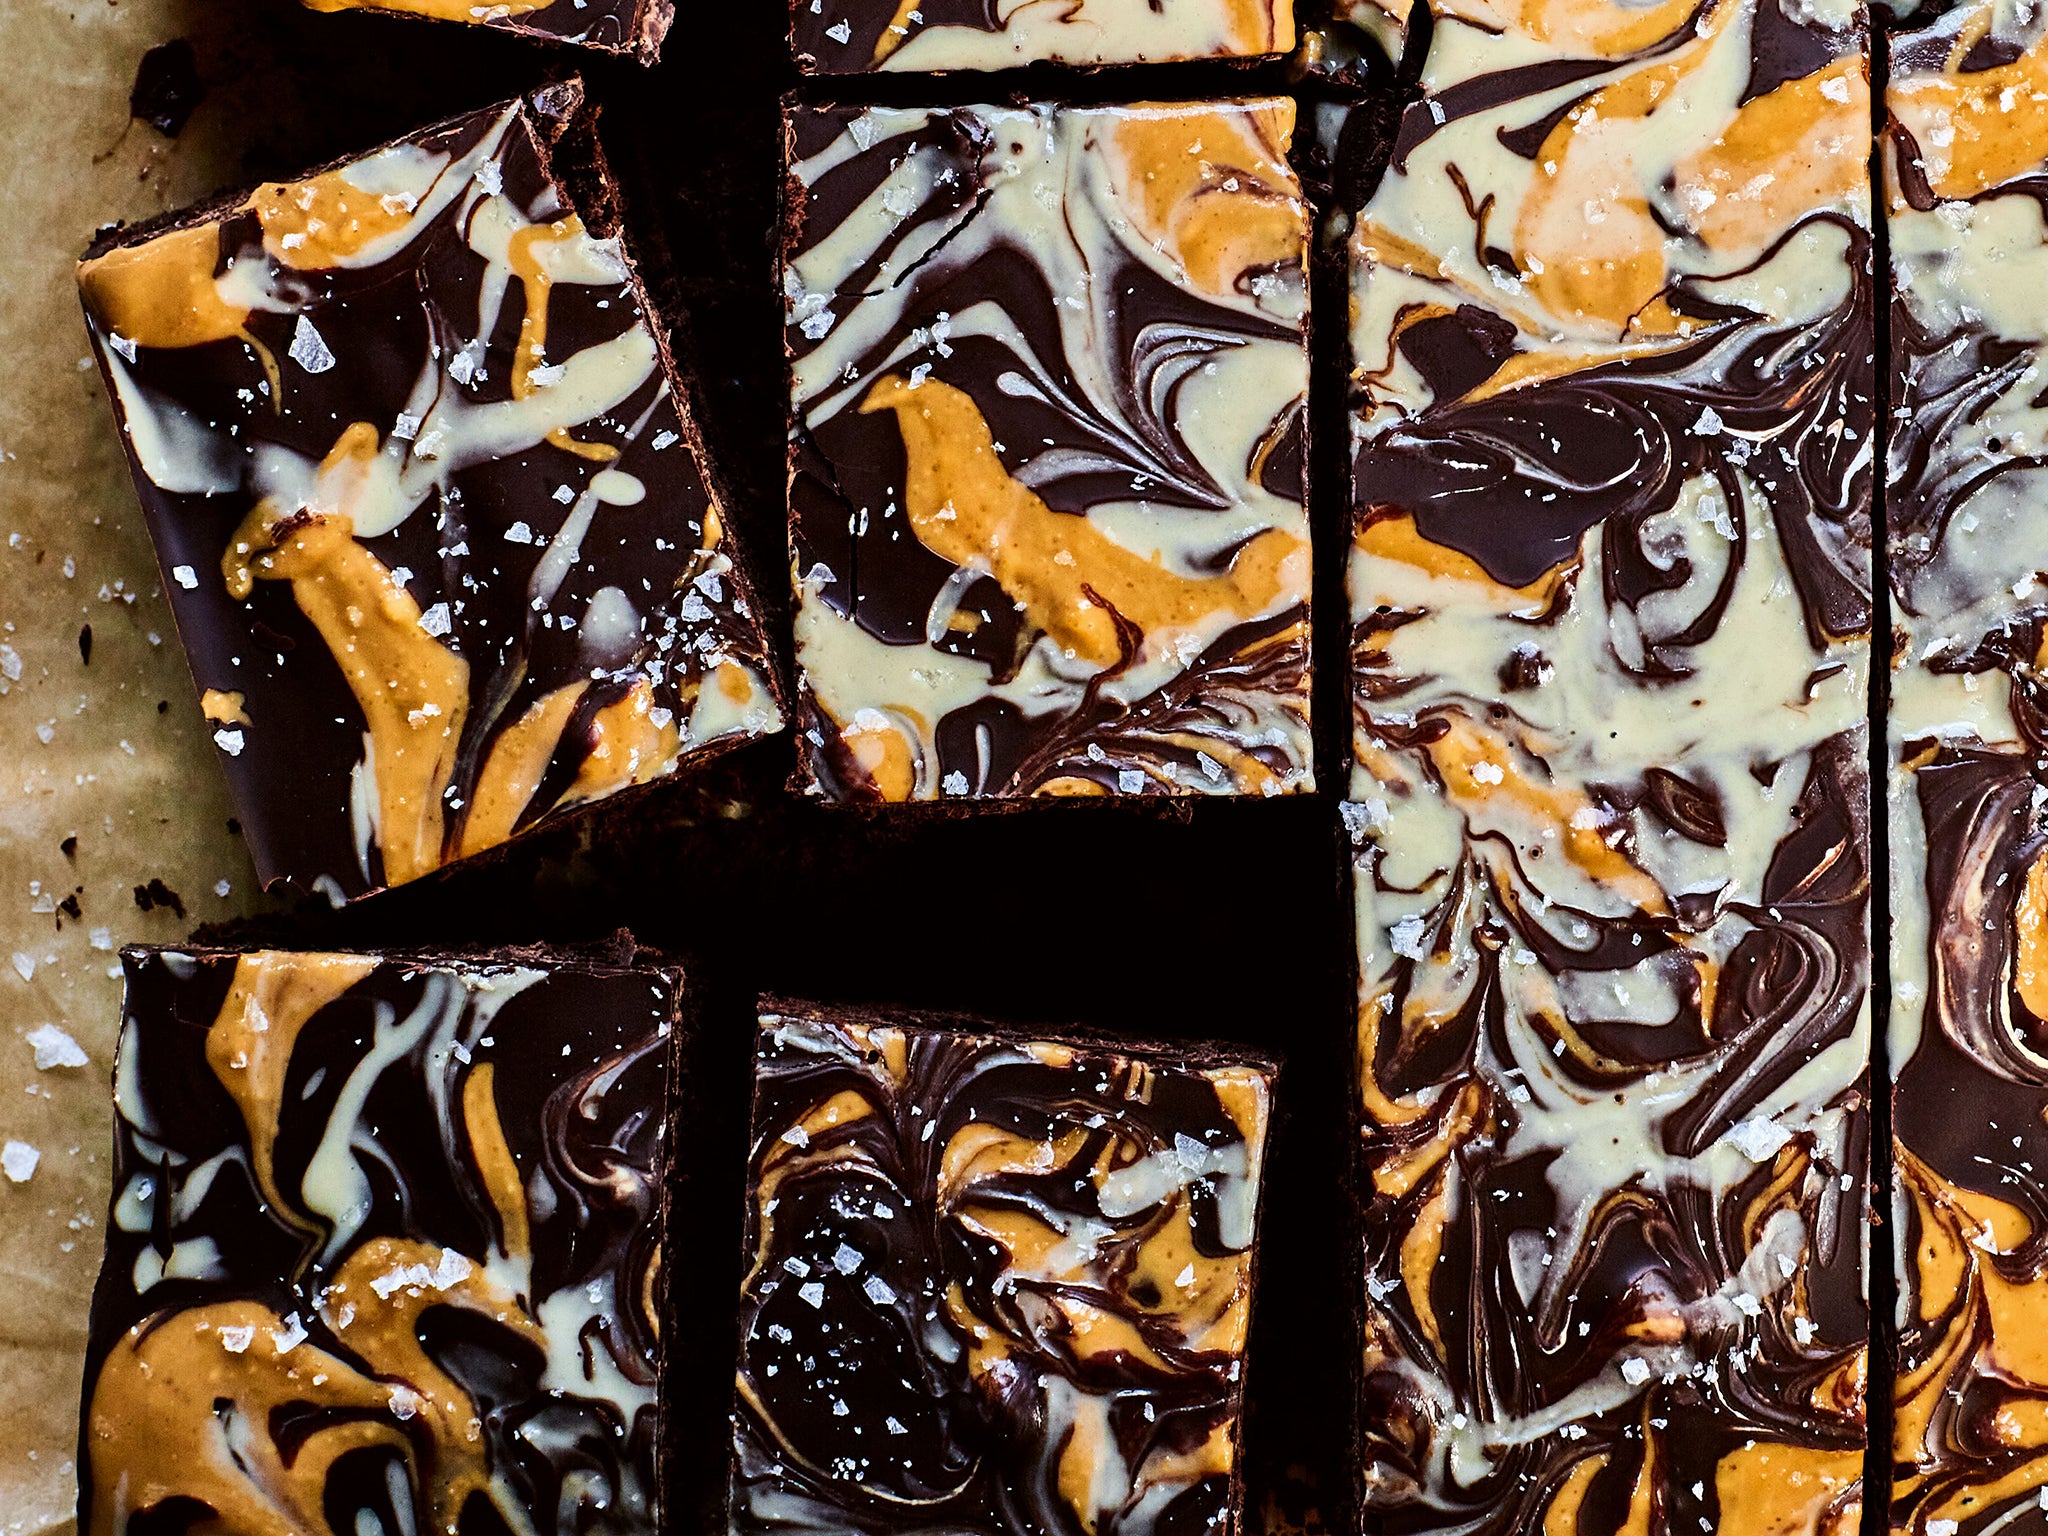 These brownies are nutty and delicious